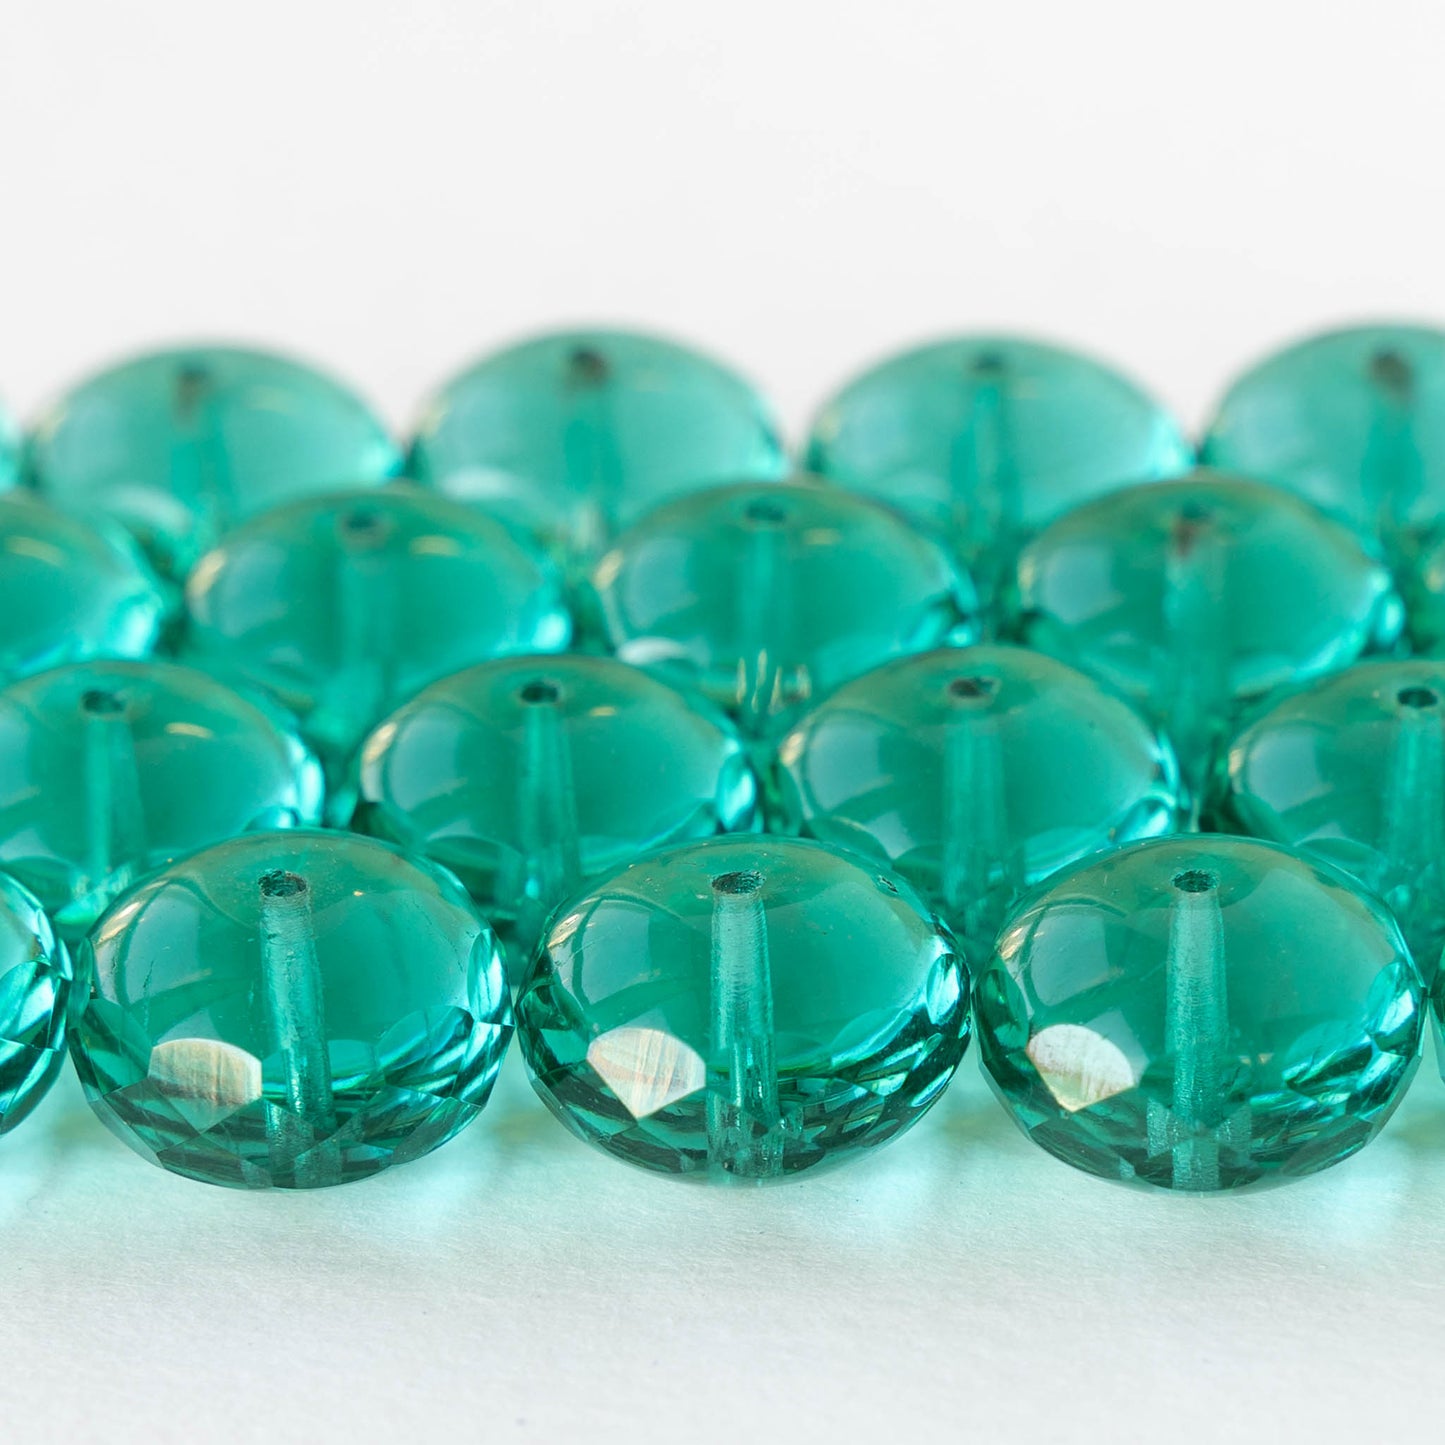 11x17mm Firepolished Rondelle Beads - Emerald Green - 4 or 12 Beads